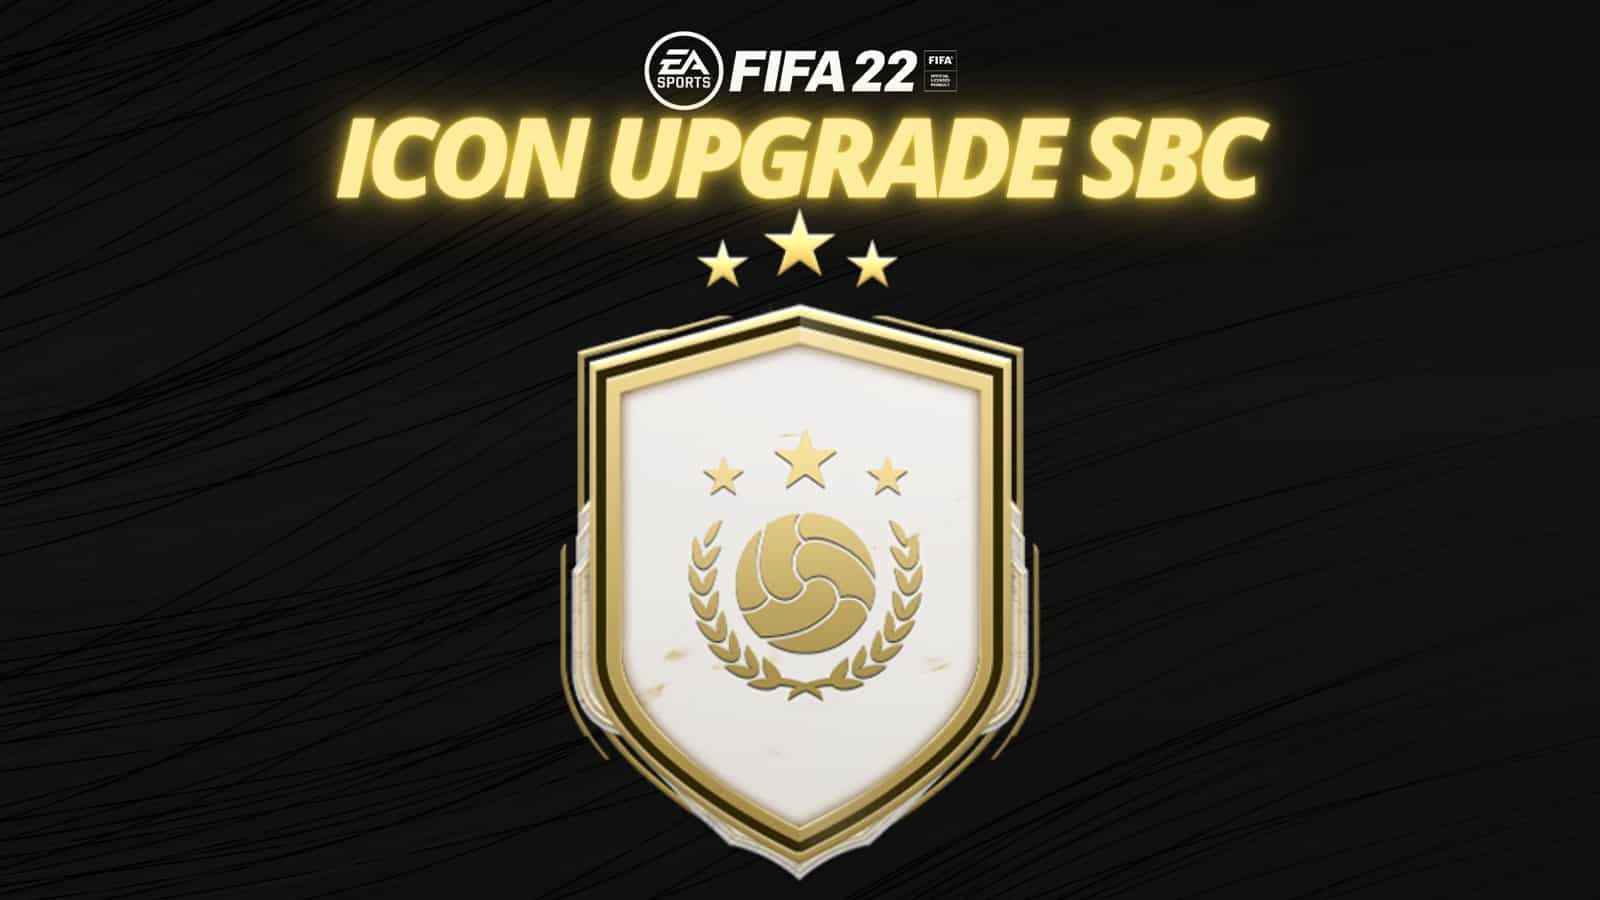 FIFA 23 Base Icons guide with the best Max 86 Icon Upgrade SBC rewards